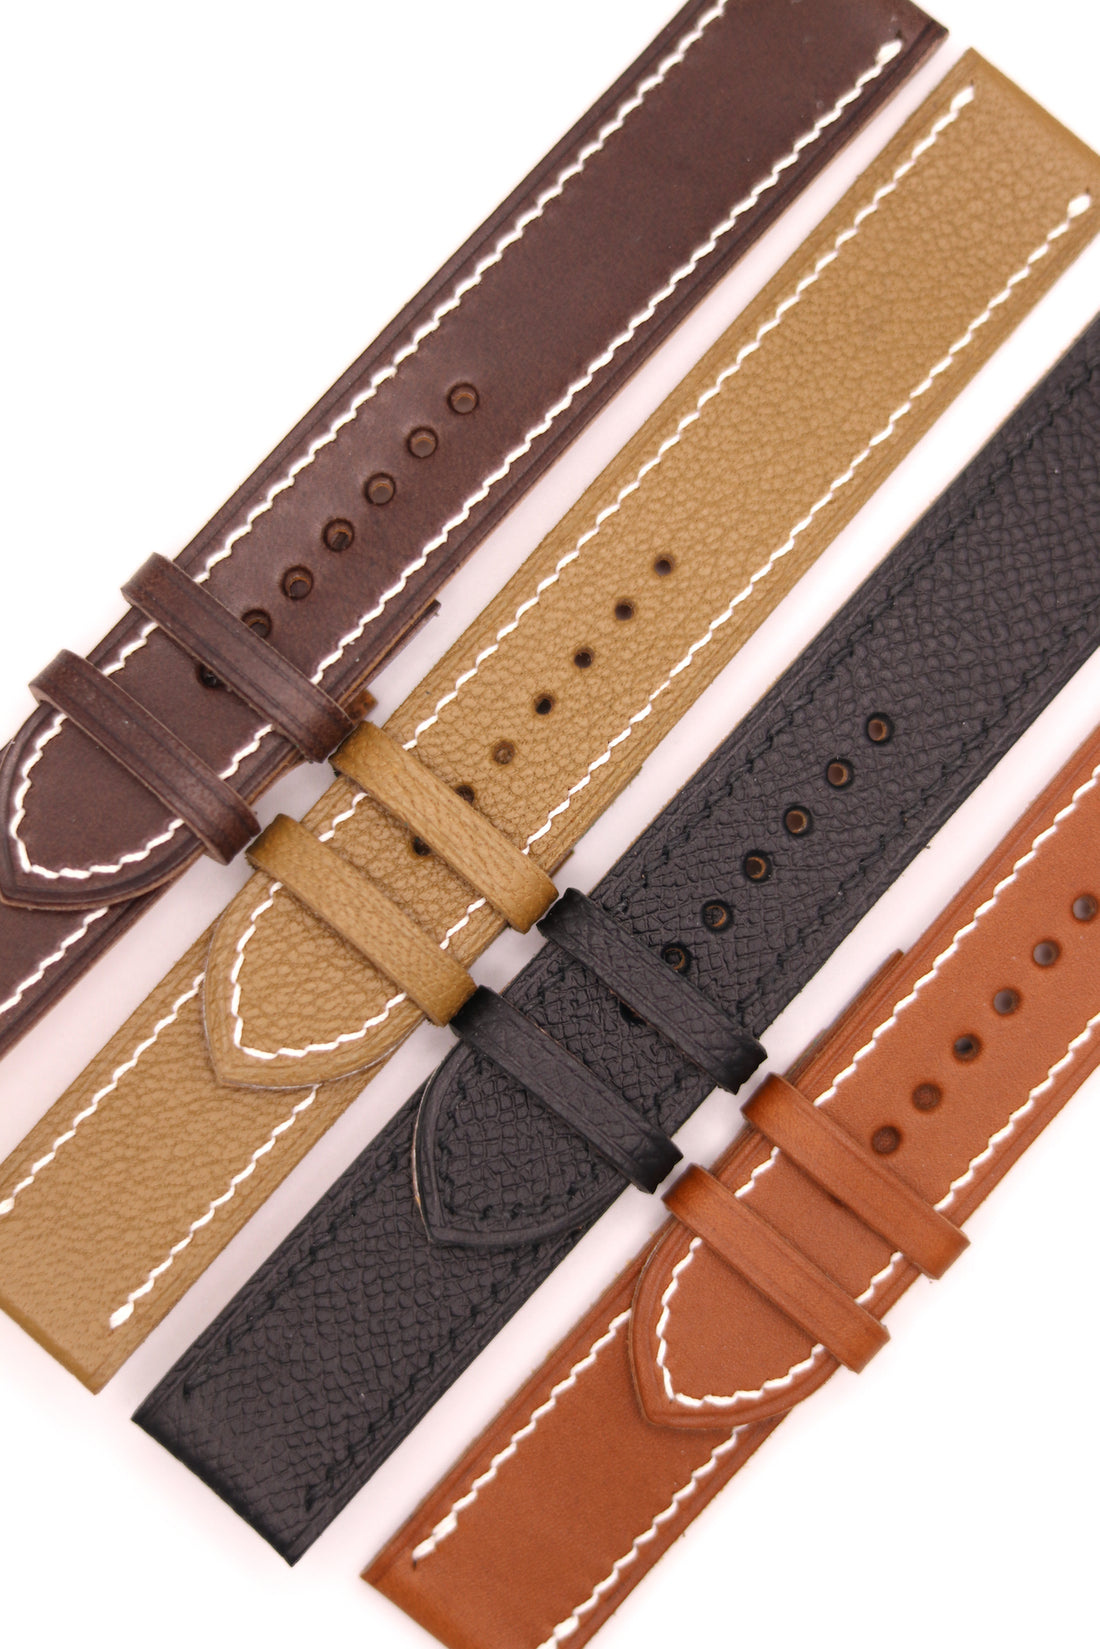 In Detail - Our Leather Apple Watch Straps